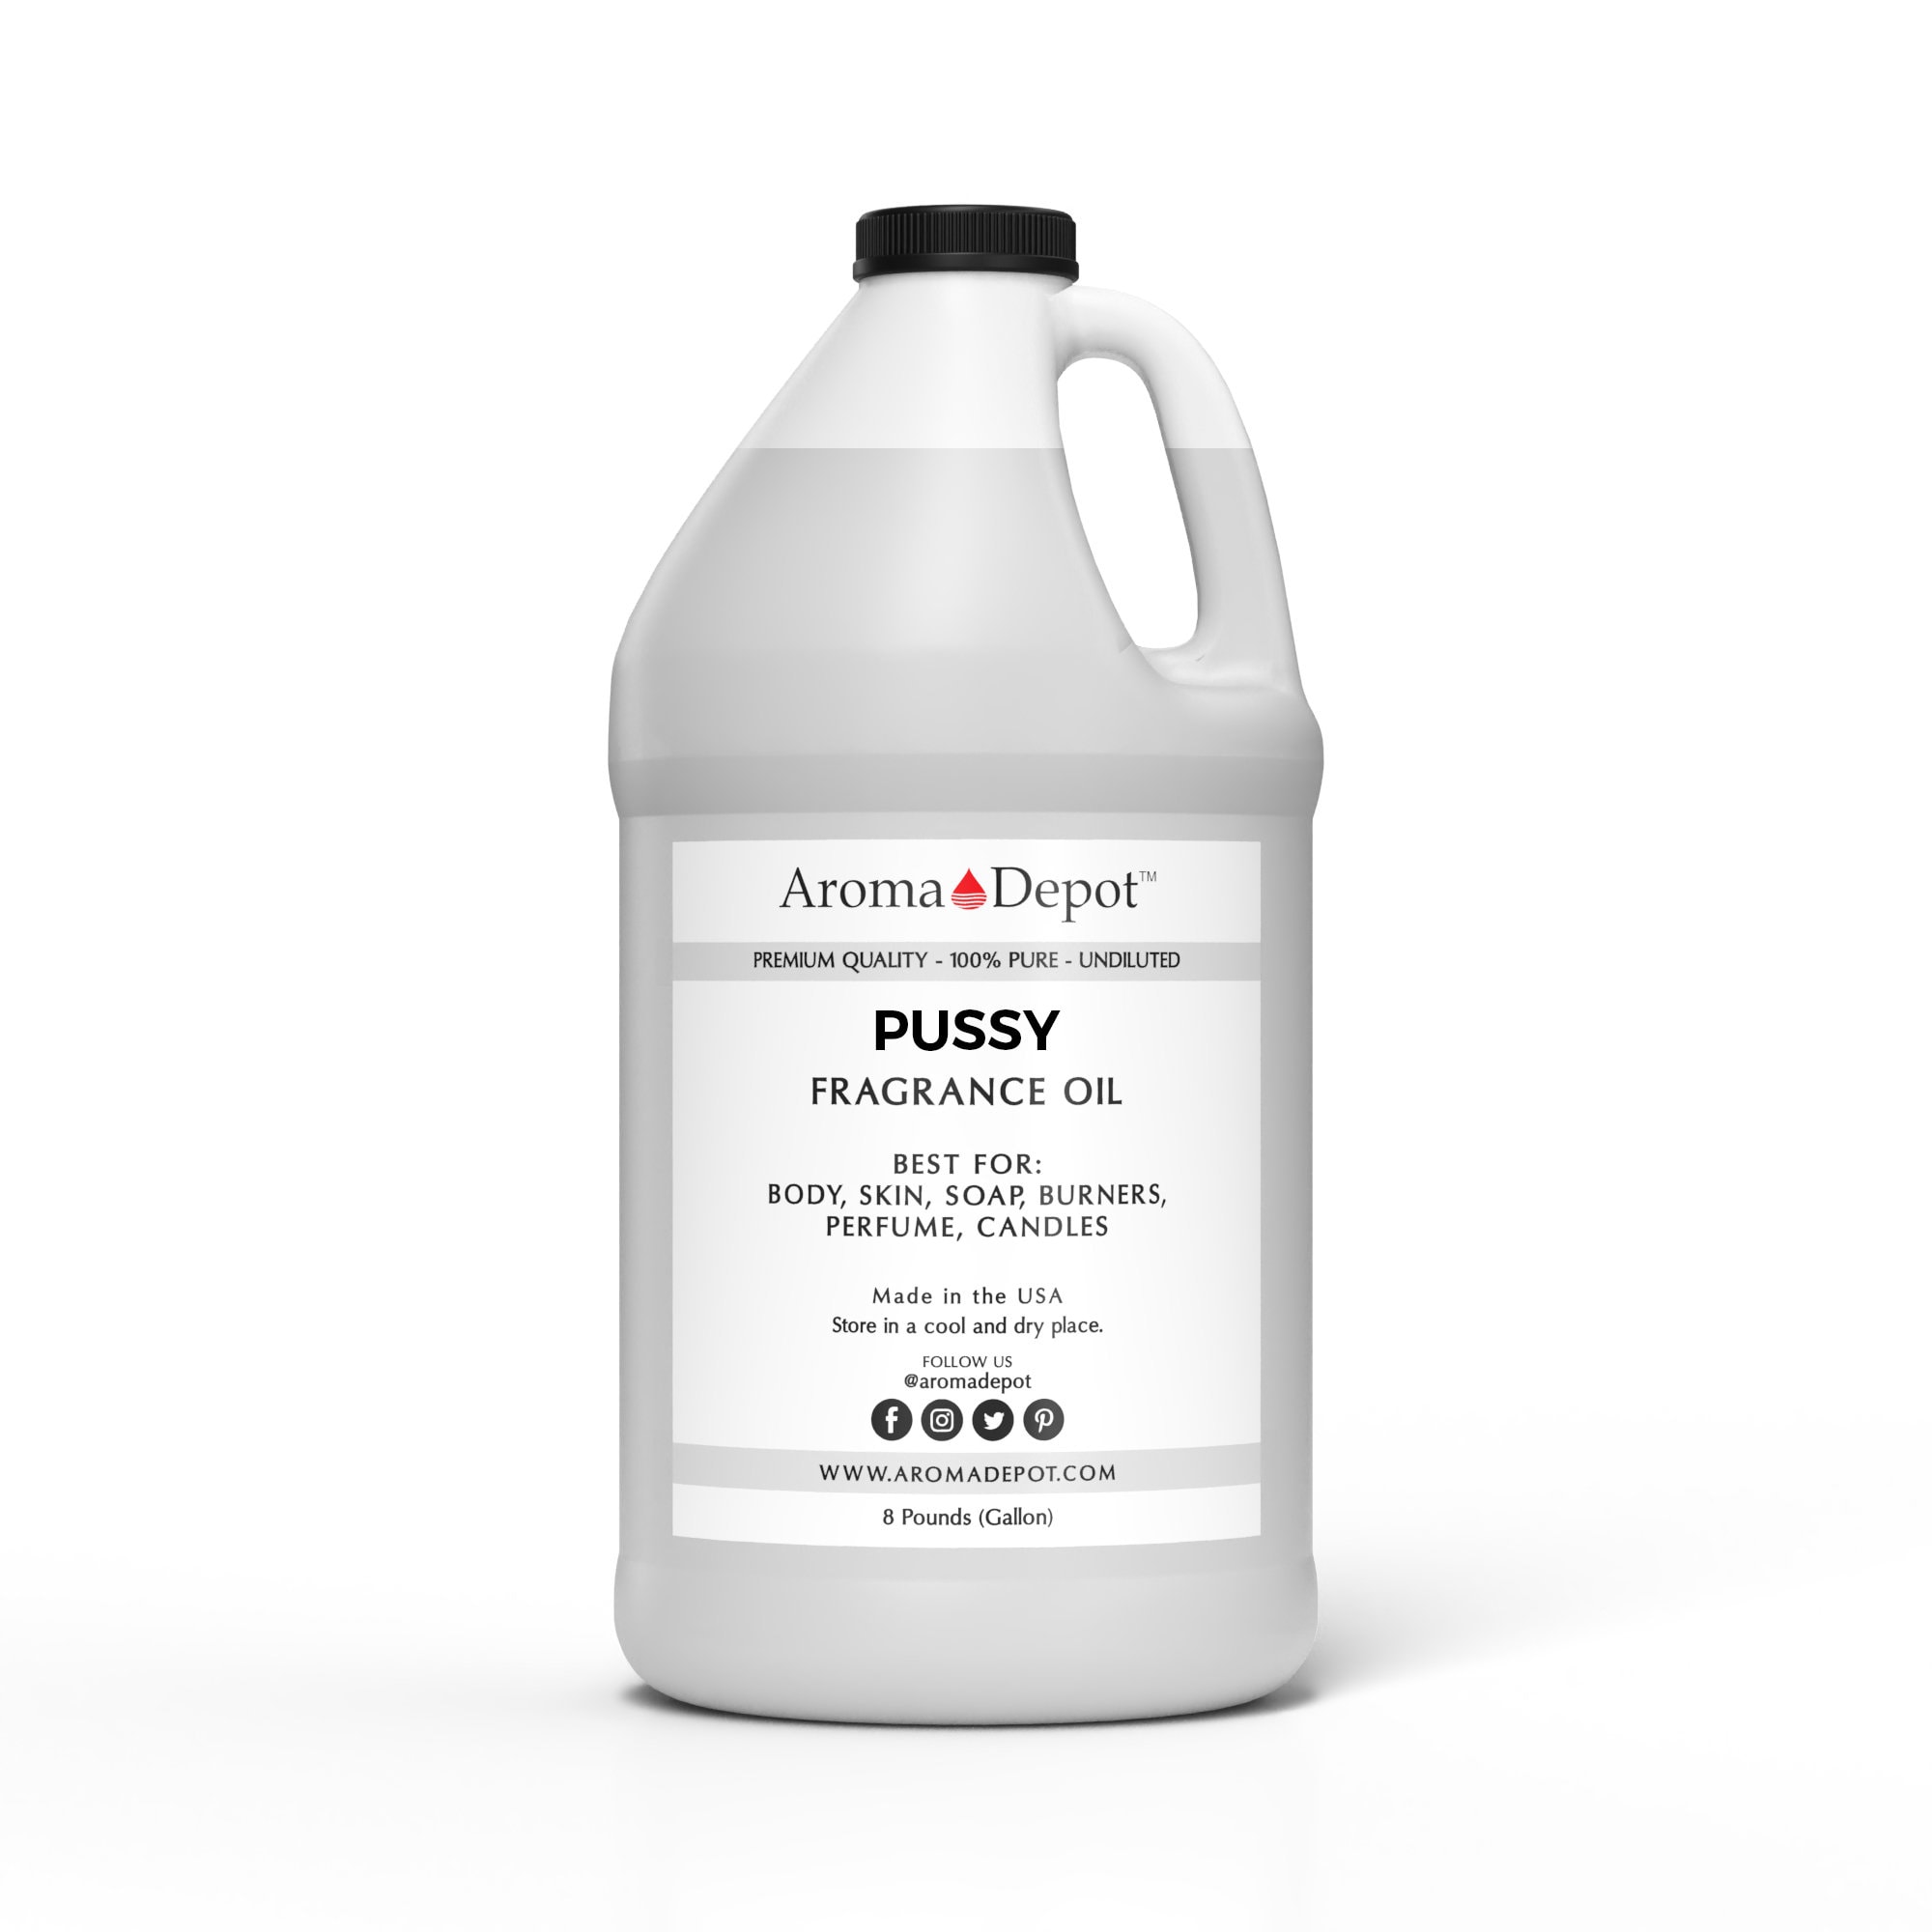 Pussy Fragrance Oil for Birthday Soap Making Supplies, Body